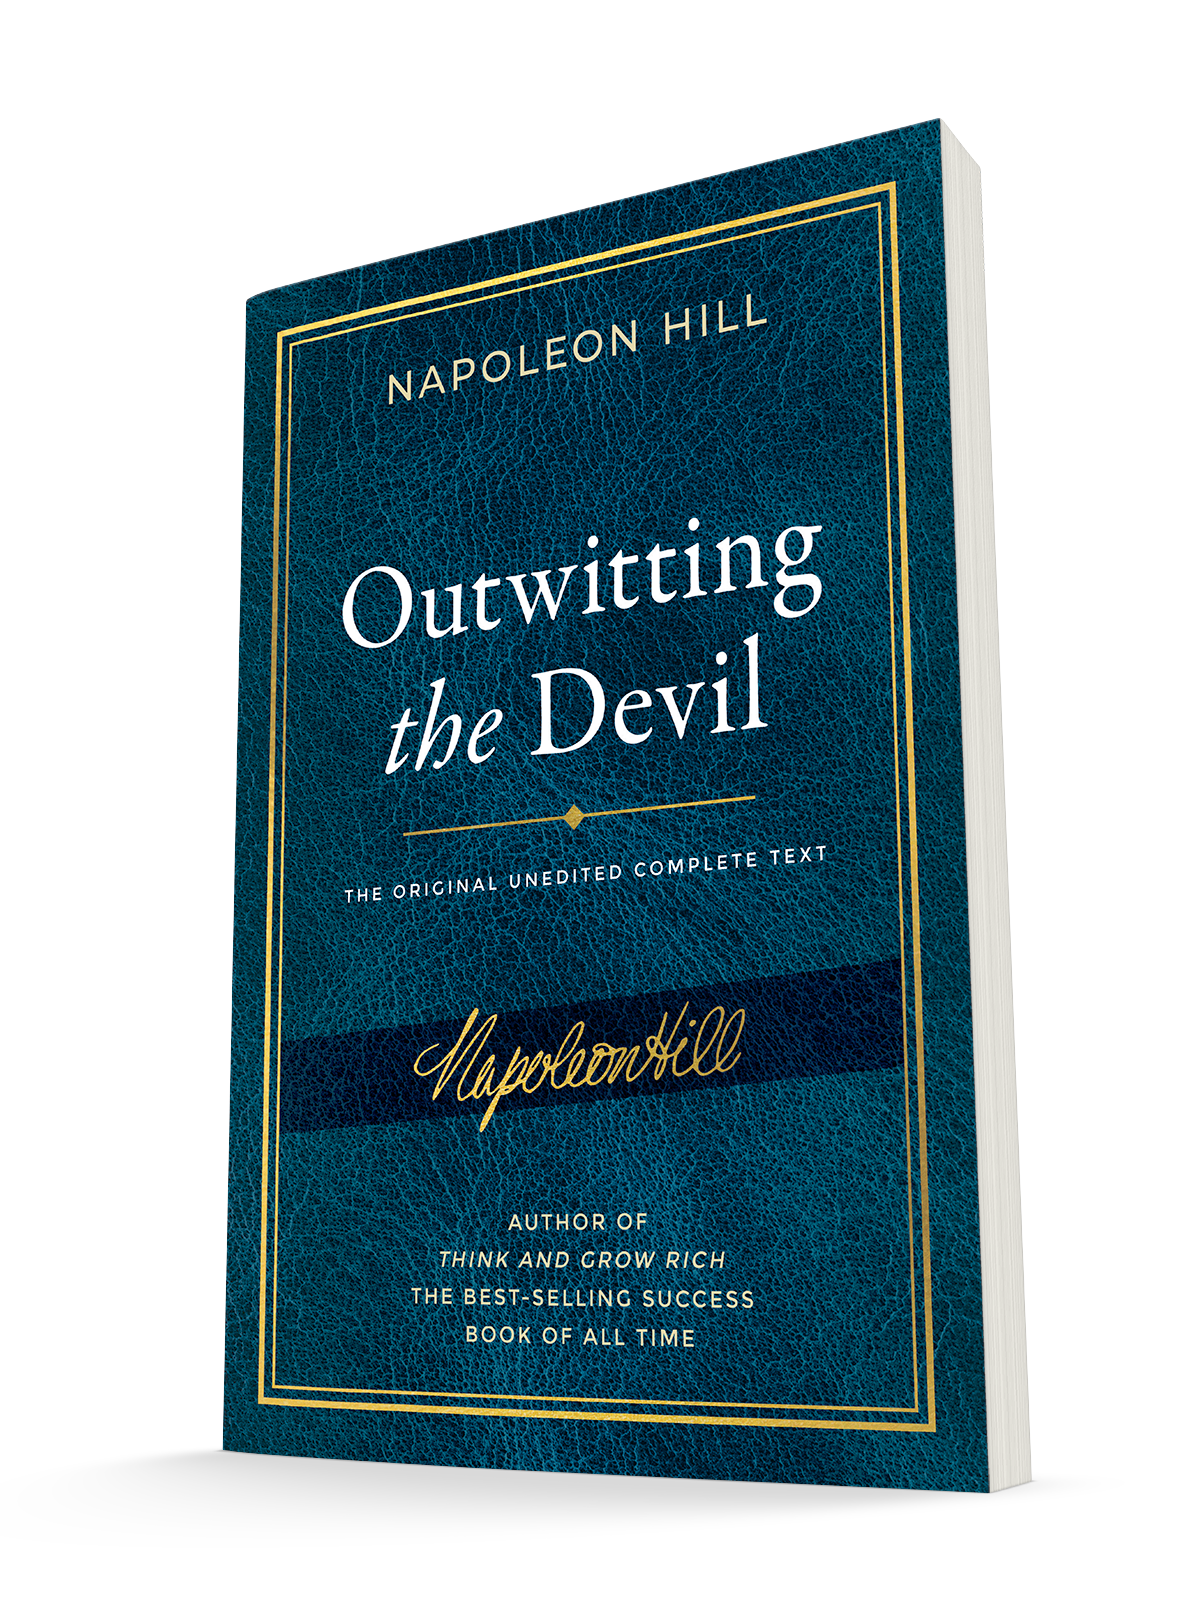 Outwitting the Devil: The Complete Text, Reproduced from Napoleon